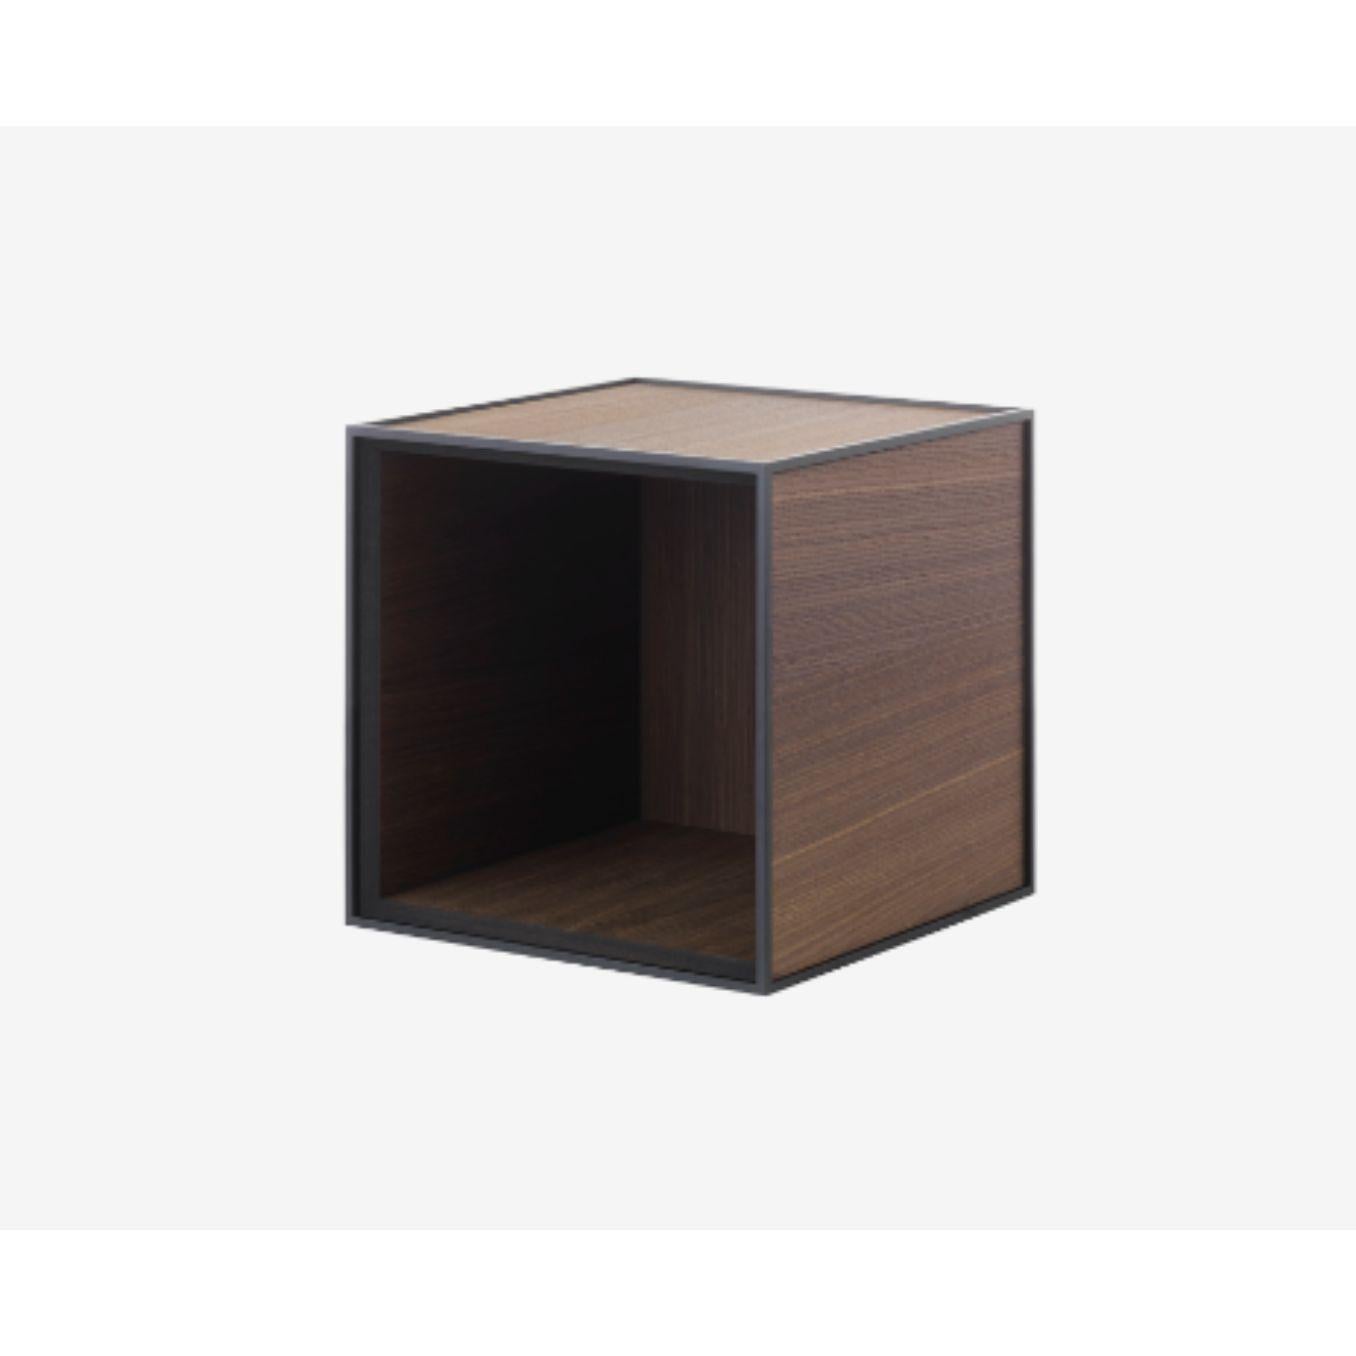 35 smoked Oak frame box by Lassen
Dimensions: w 35 x d 35 x h 35 cm 
Materials: Finér, Melamin, Melamin, Melamine, Metal, Veneer, Oak
Also available in different colors and dimensions. 

By Lassen is a Danish design brand focused on iconic